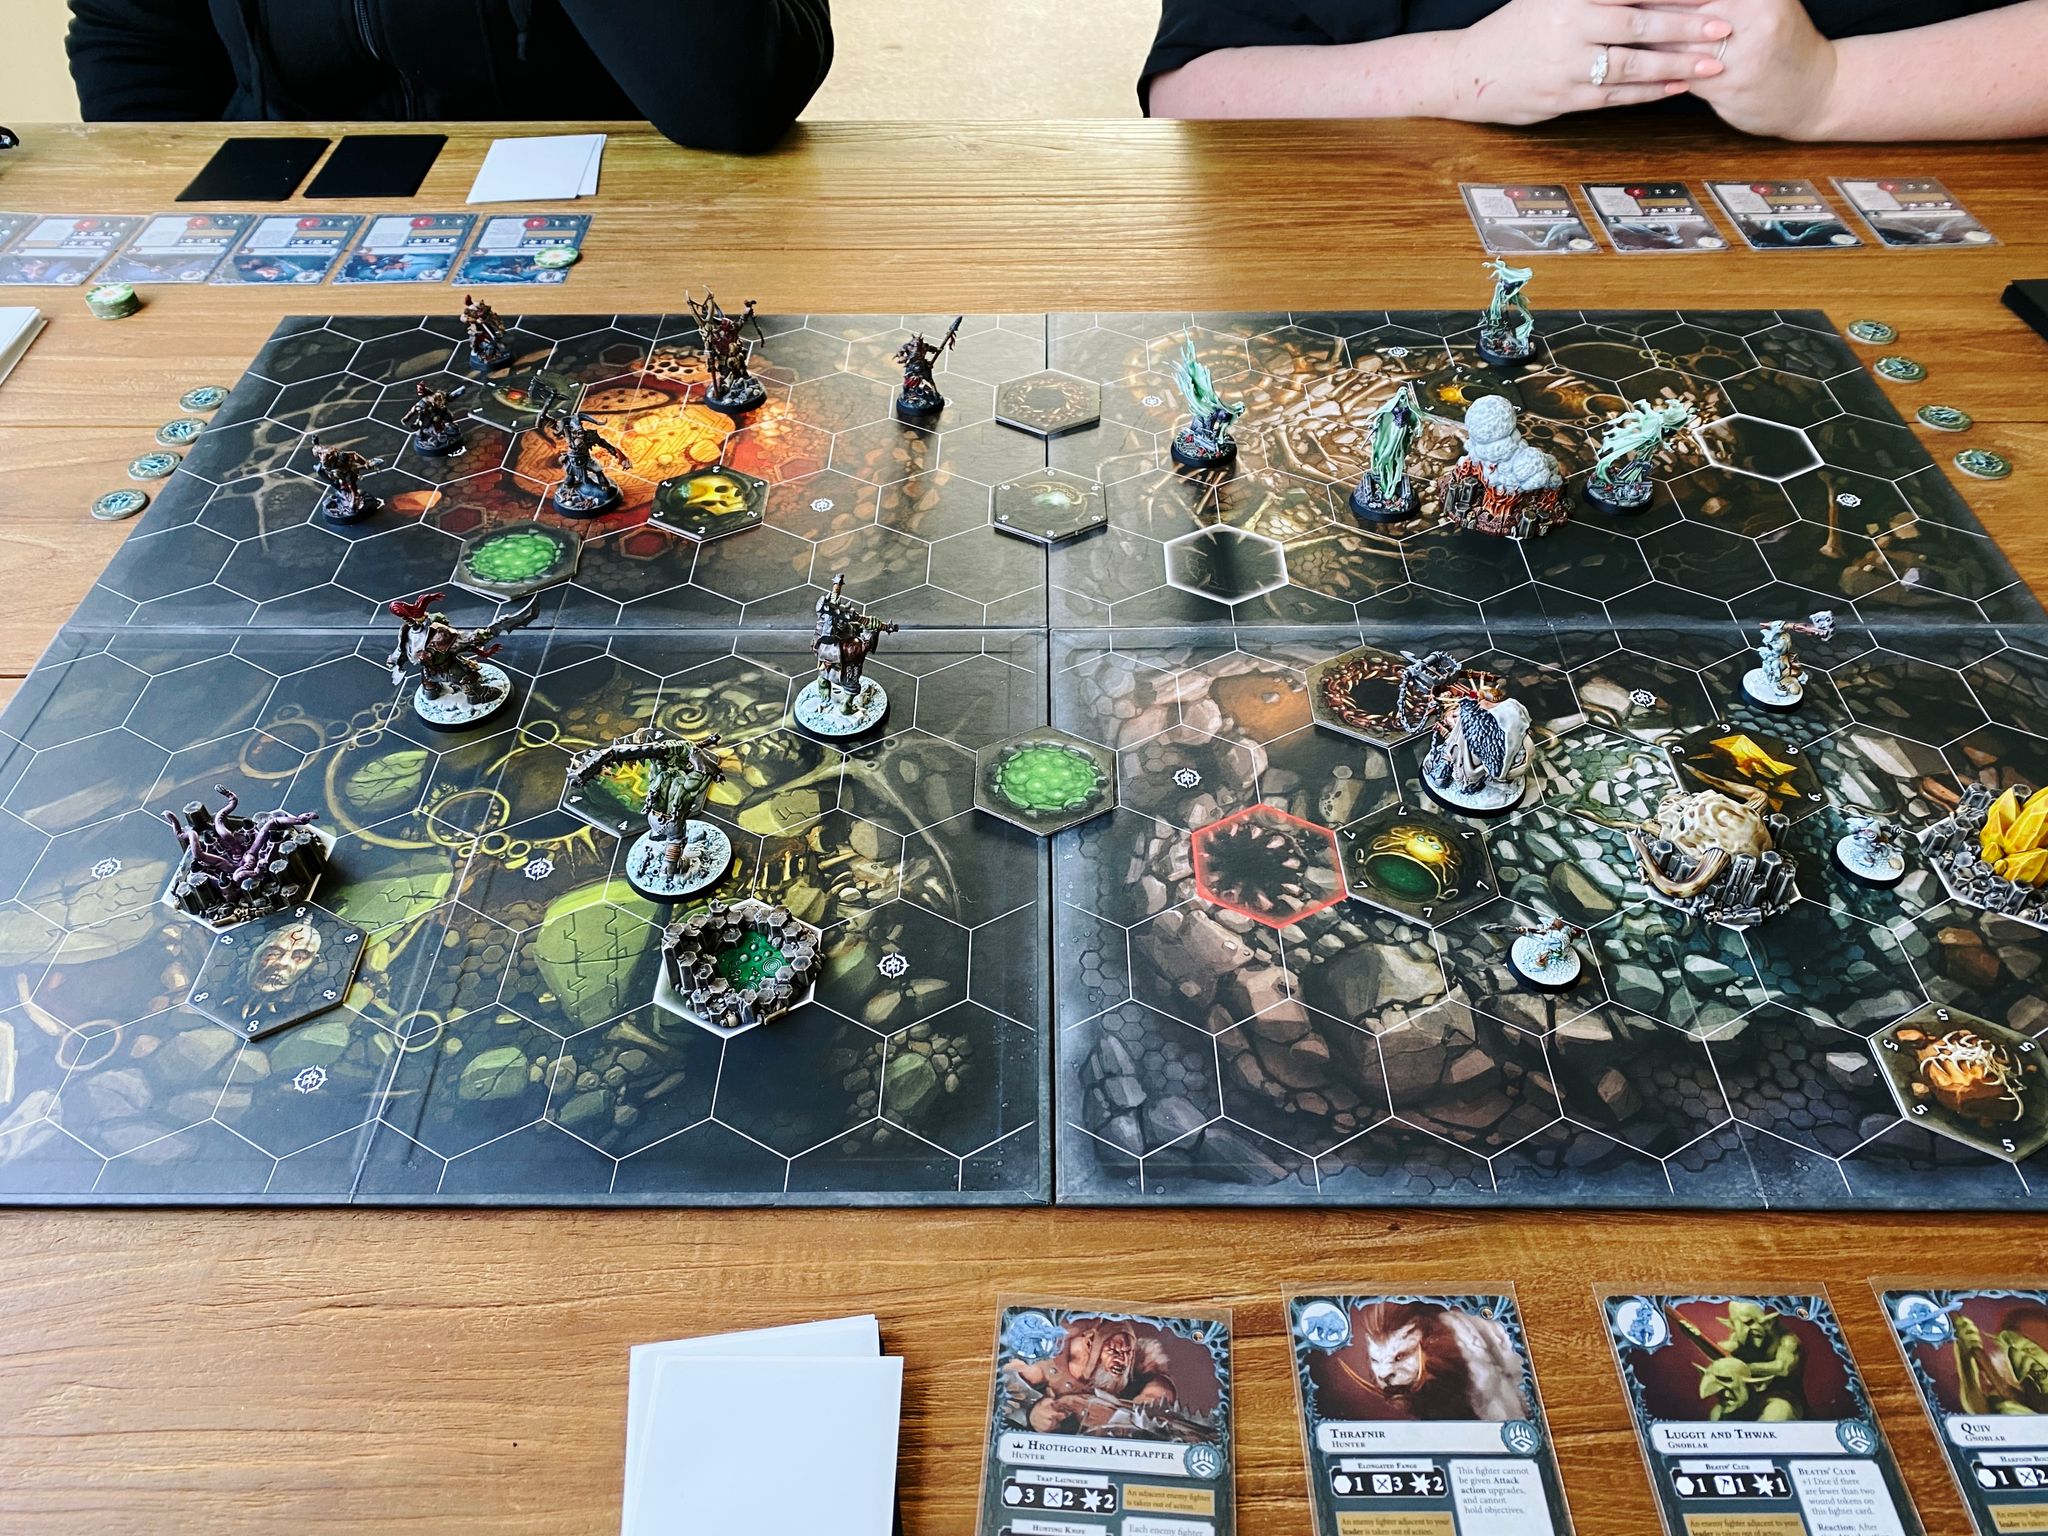 A photo of a four-player game of Warhammer Underworlds. The board has hexes marked out on it, at the bottom right are Hrothgorn's Mantrappers (a big ogre and 4 goblins), bottom left at Morgok's Krushas (3 heavily-armoured orks), top-left are Grashrak's Despoilers (6 goat people), and top-right is Lady Harrow's Mournflight (4 ghosts).